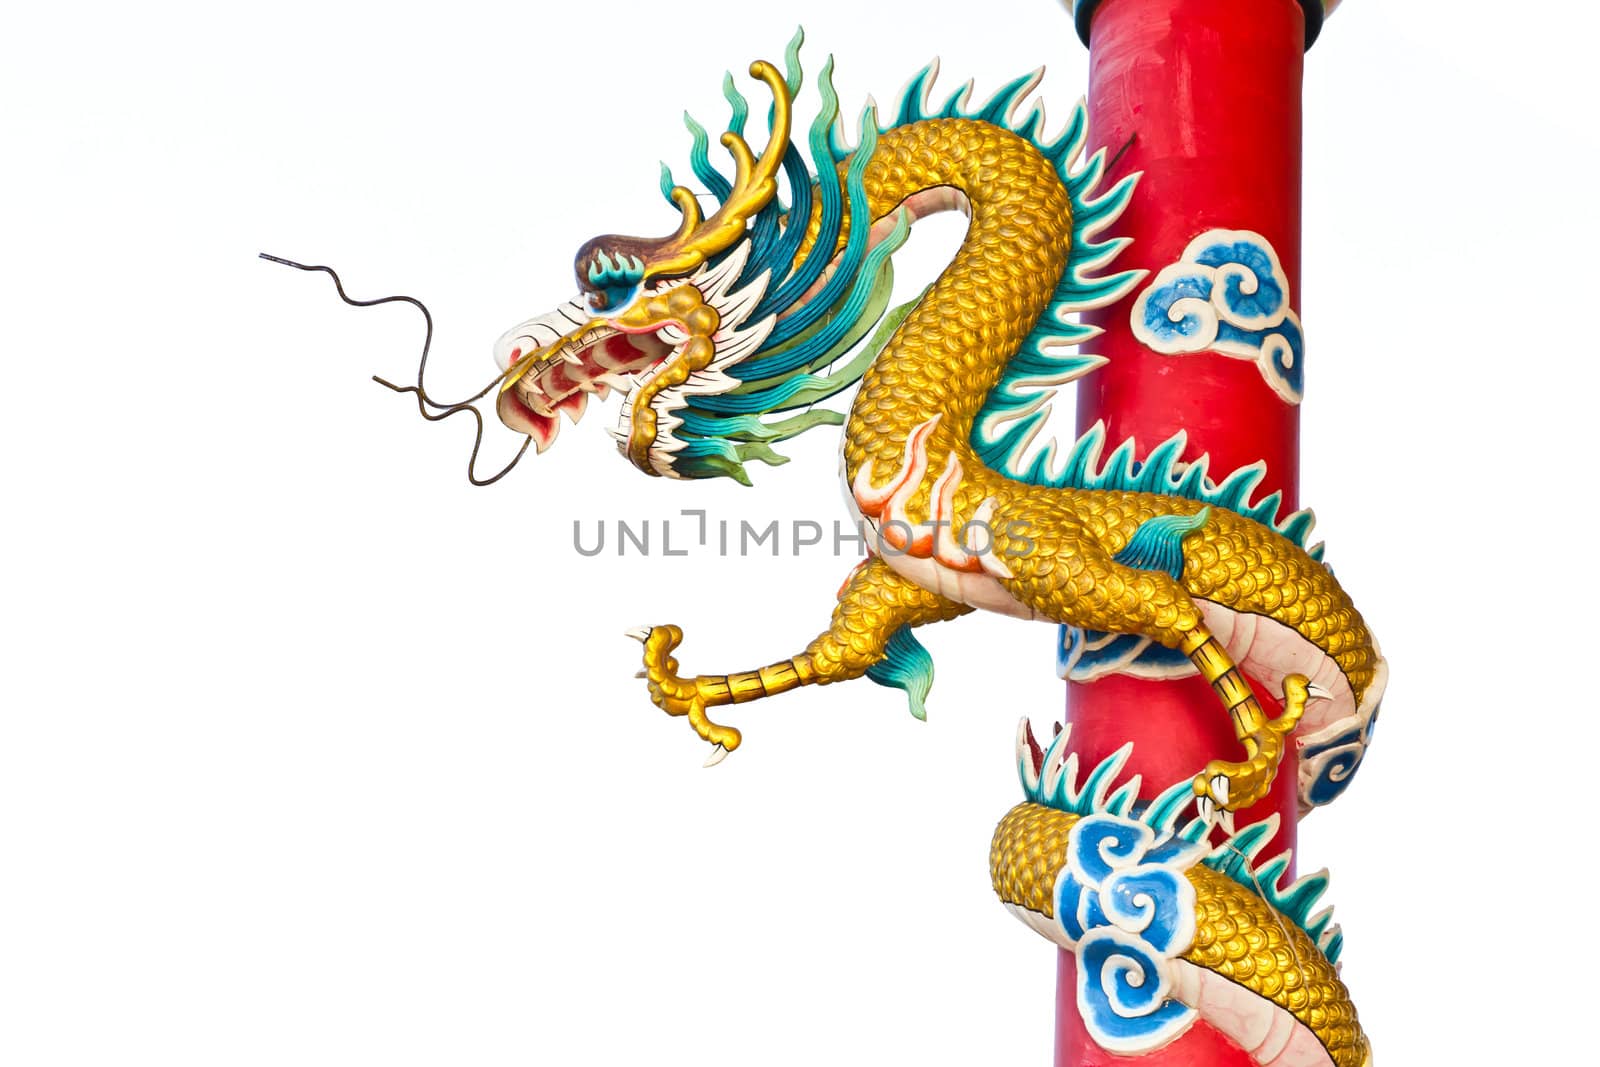 dragon statue in chinese temple